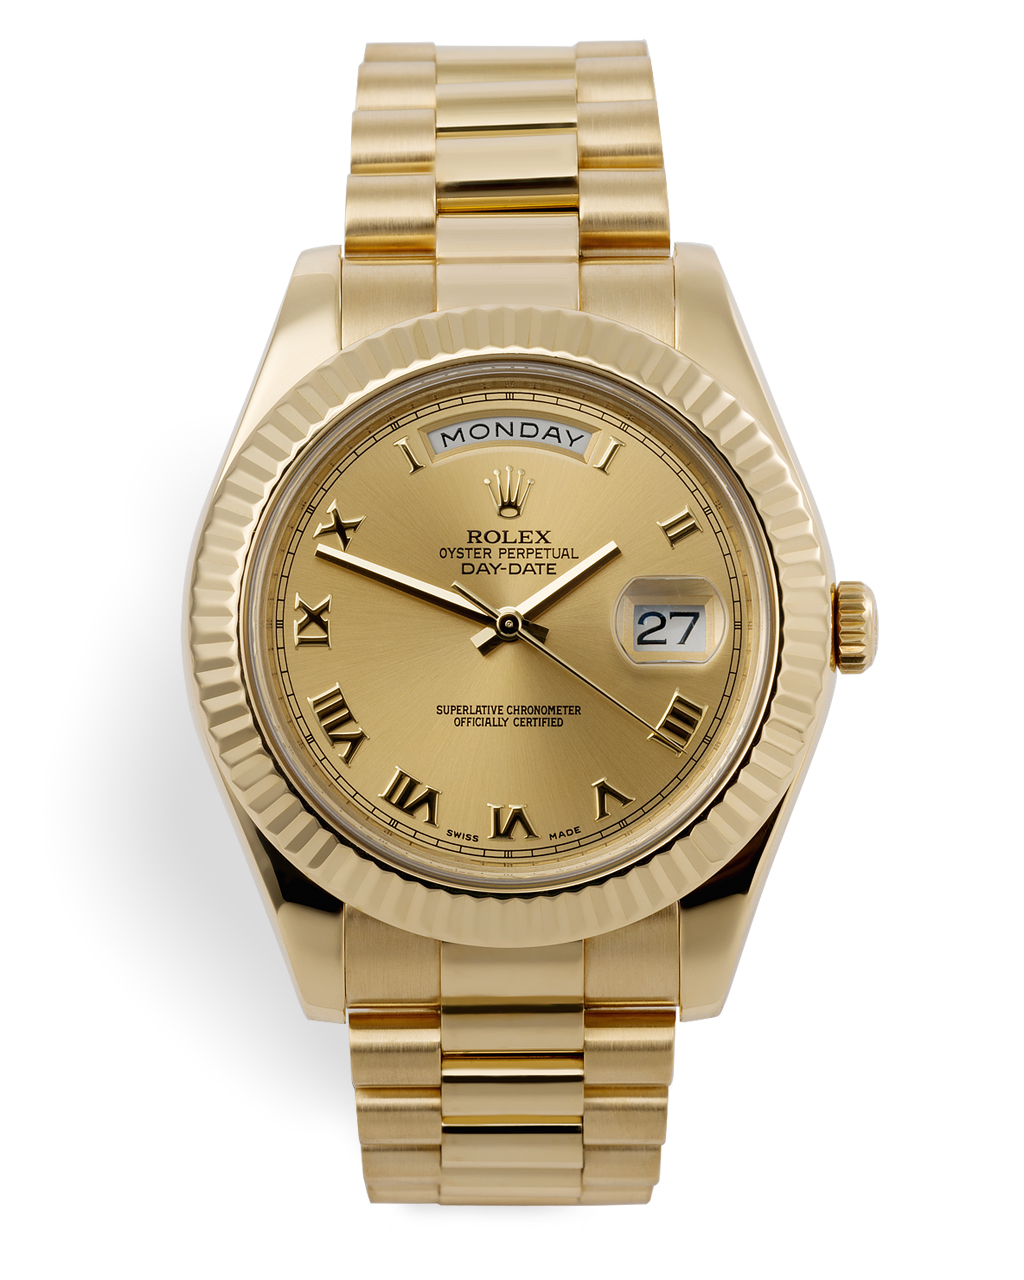 Rolex Day-Date II Watches | ref 218238 | 41mm Yellow Gold | The Watch Club